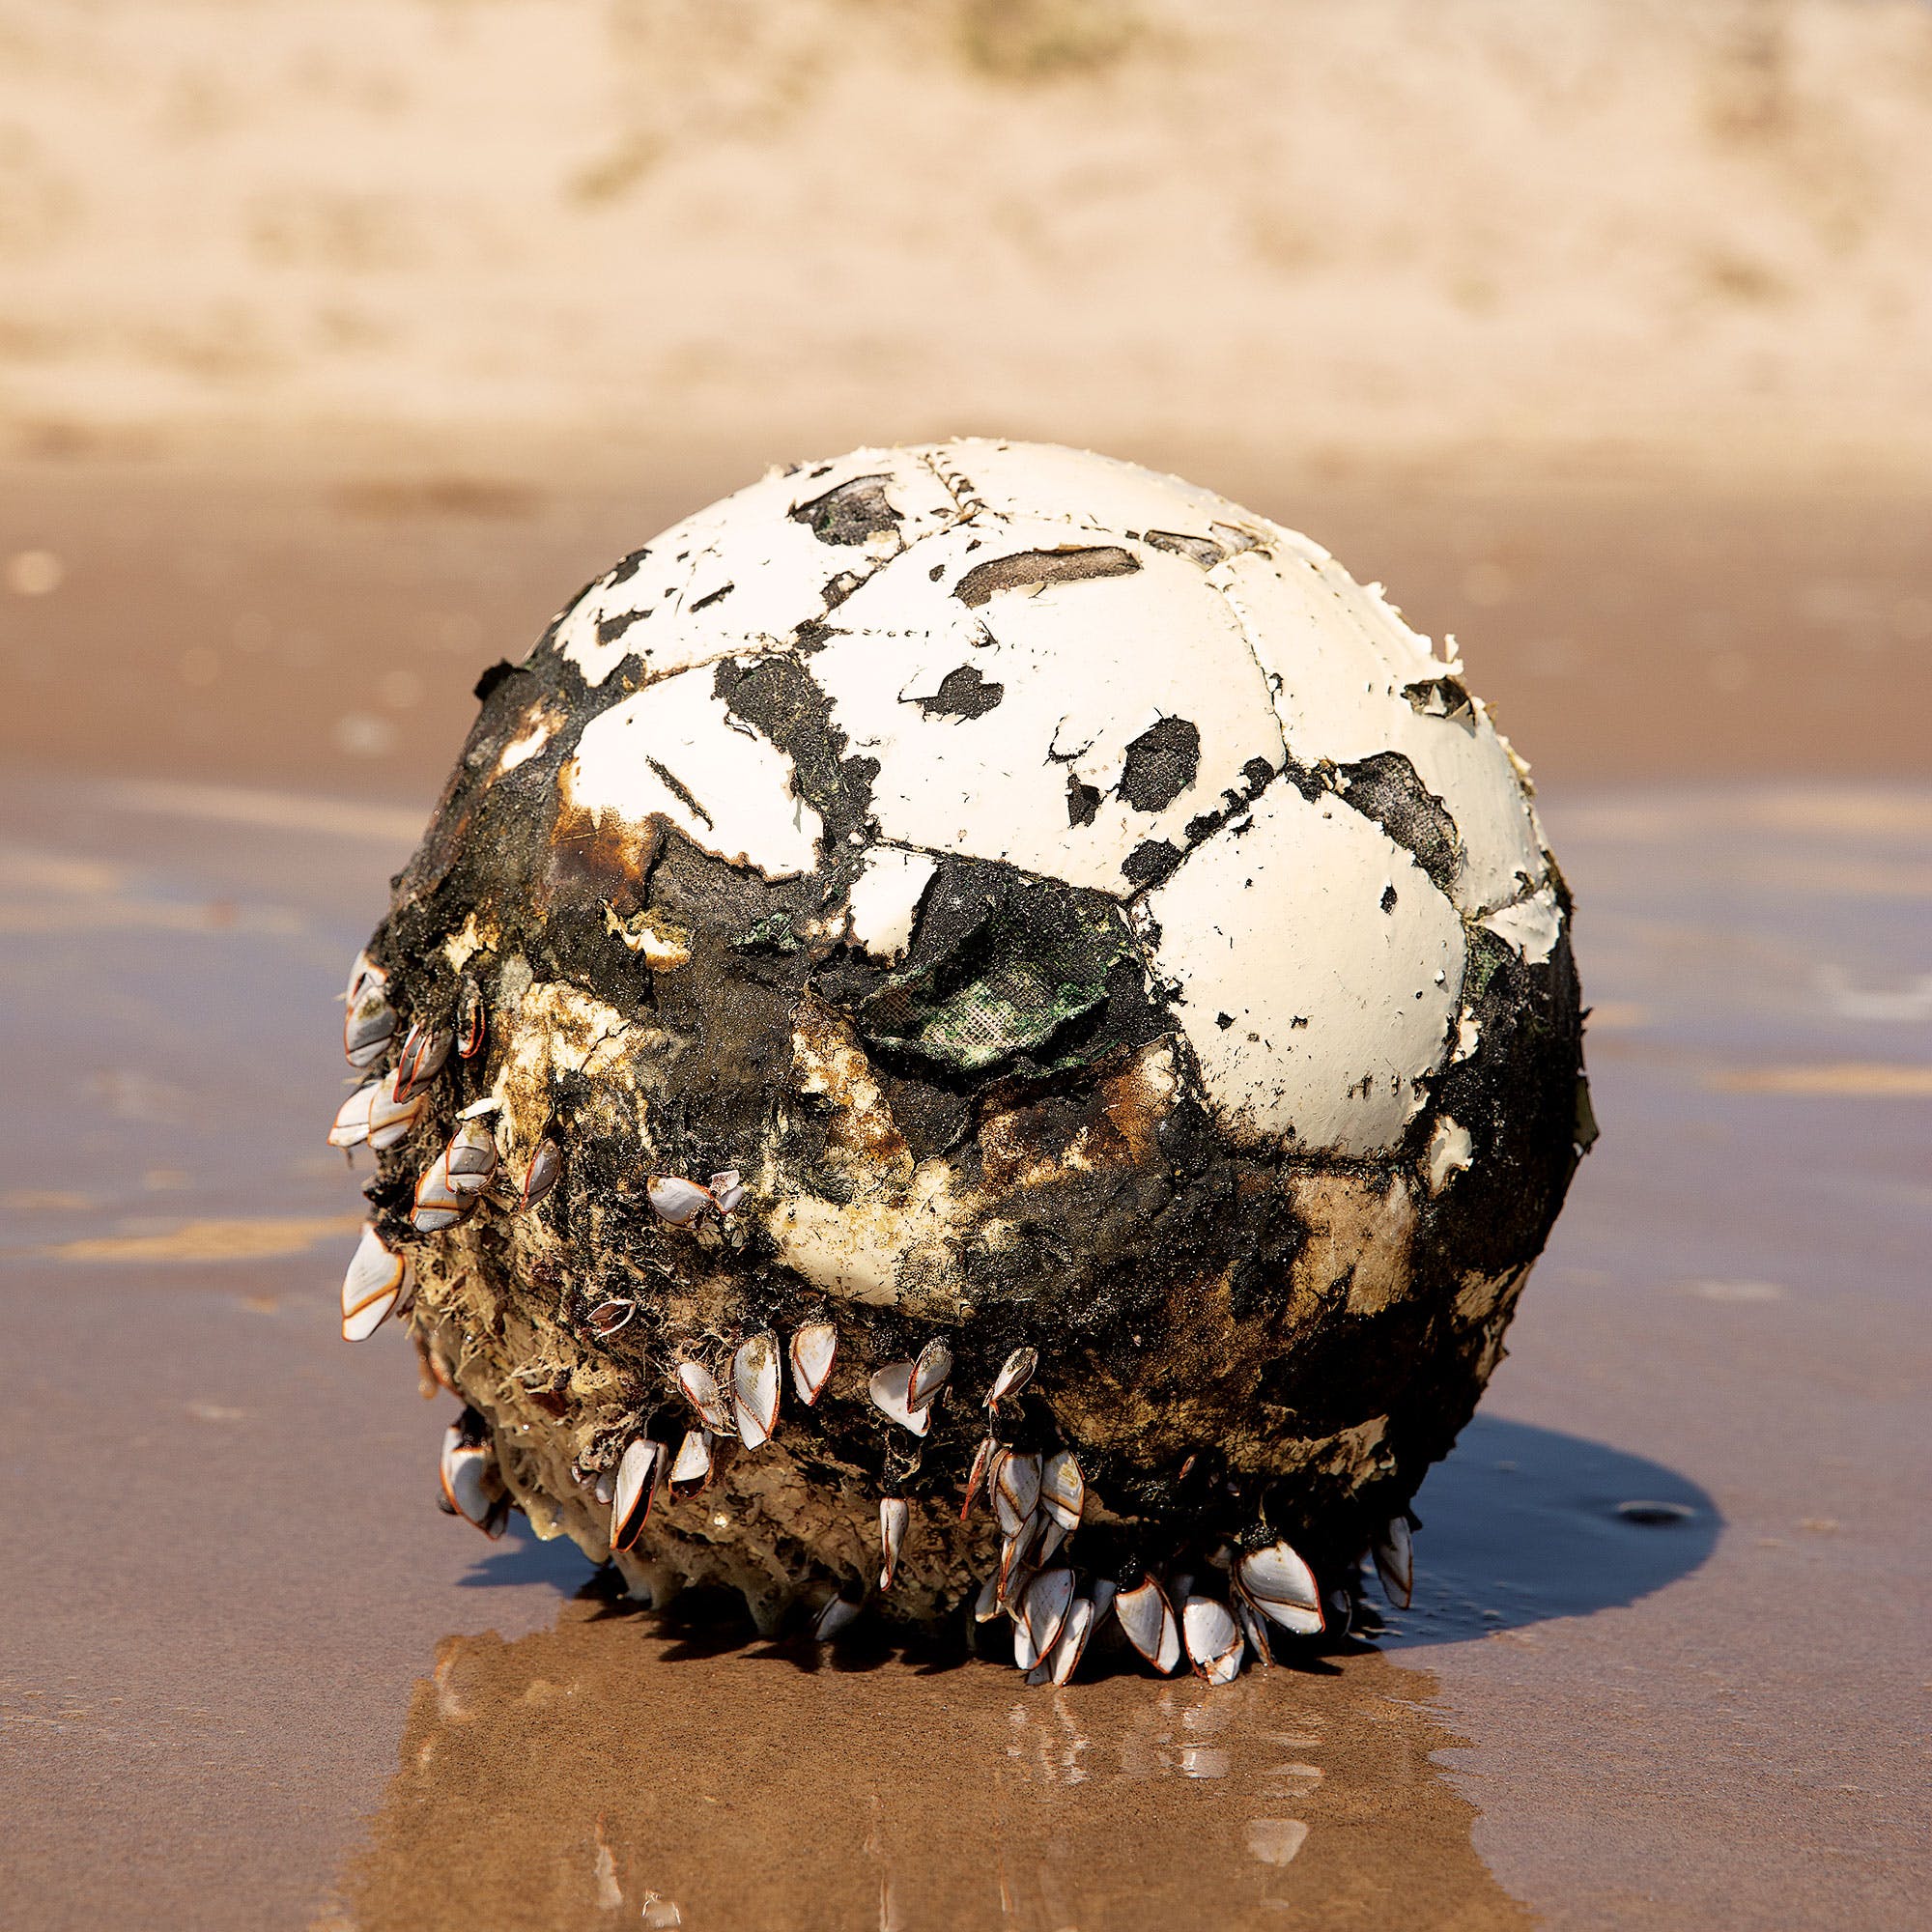 A mussel-encrusted soccer ball near mile marker 42.